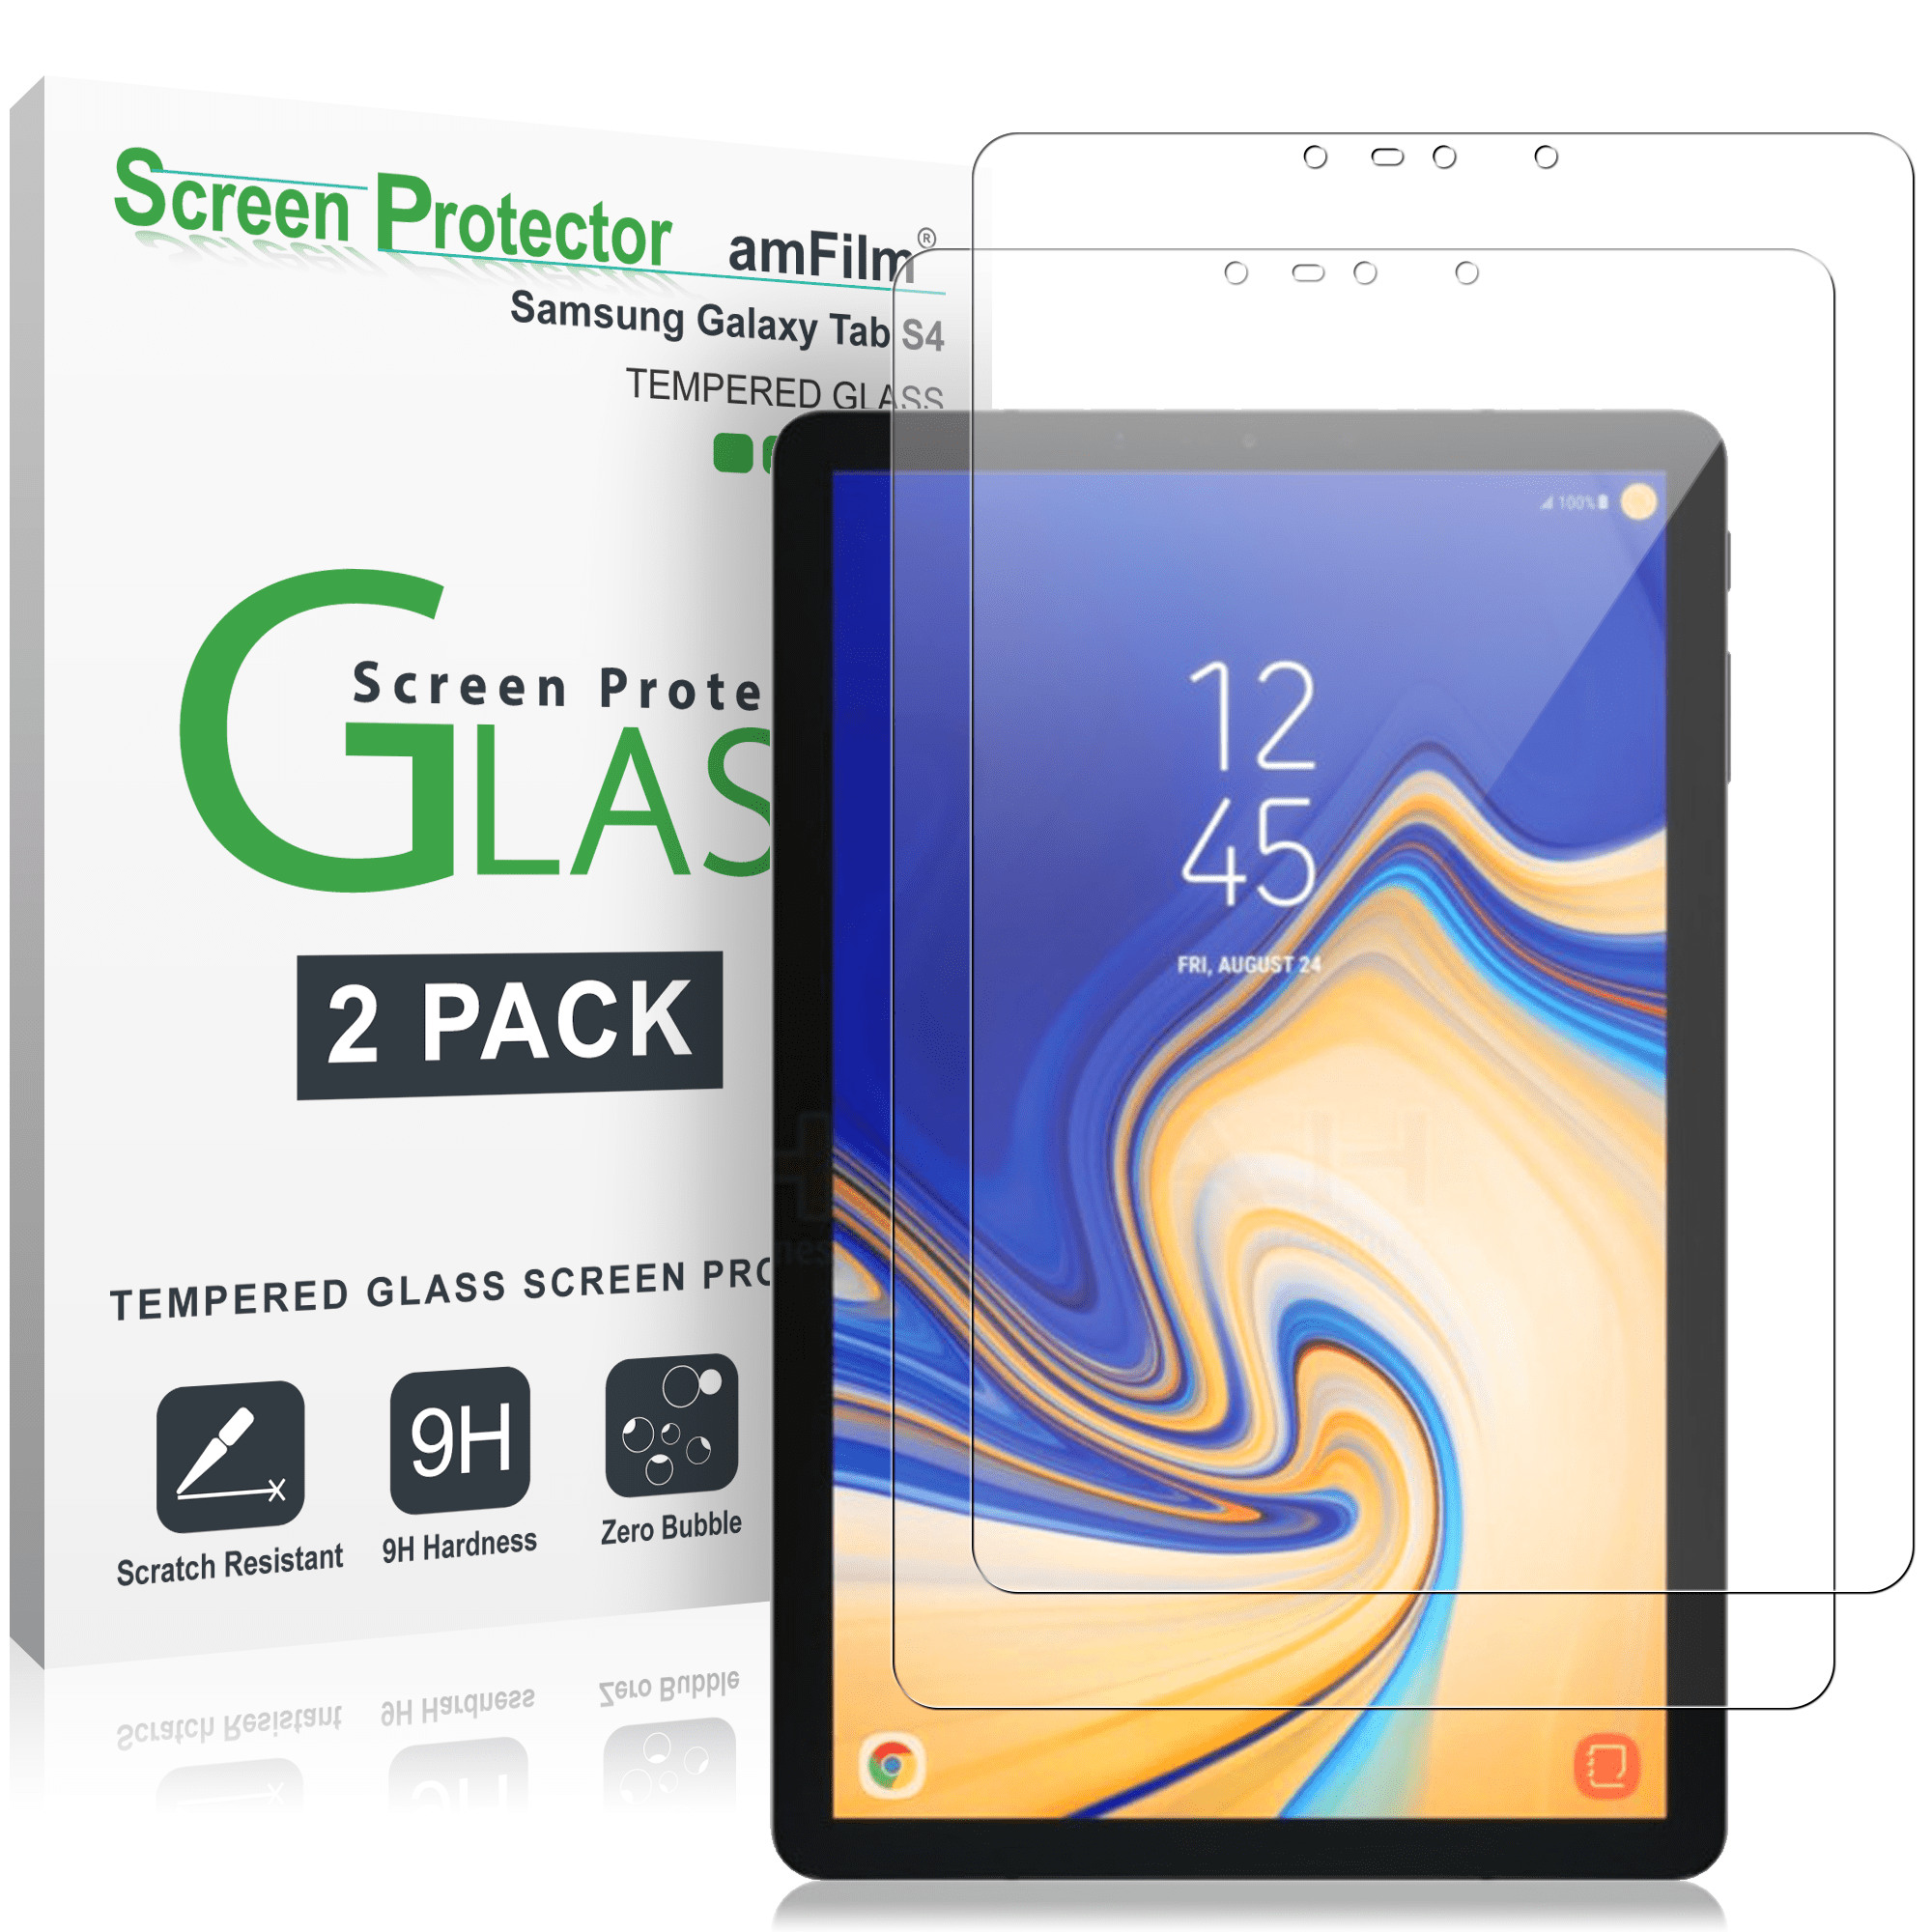 Tempered Glass Screen Protector for Samsung Galaxy Tab S4 10.5 Tablet 